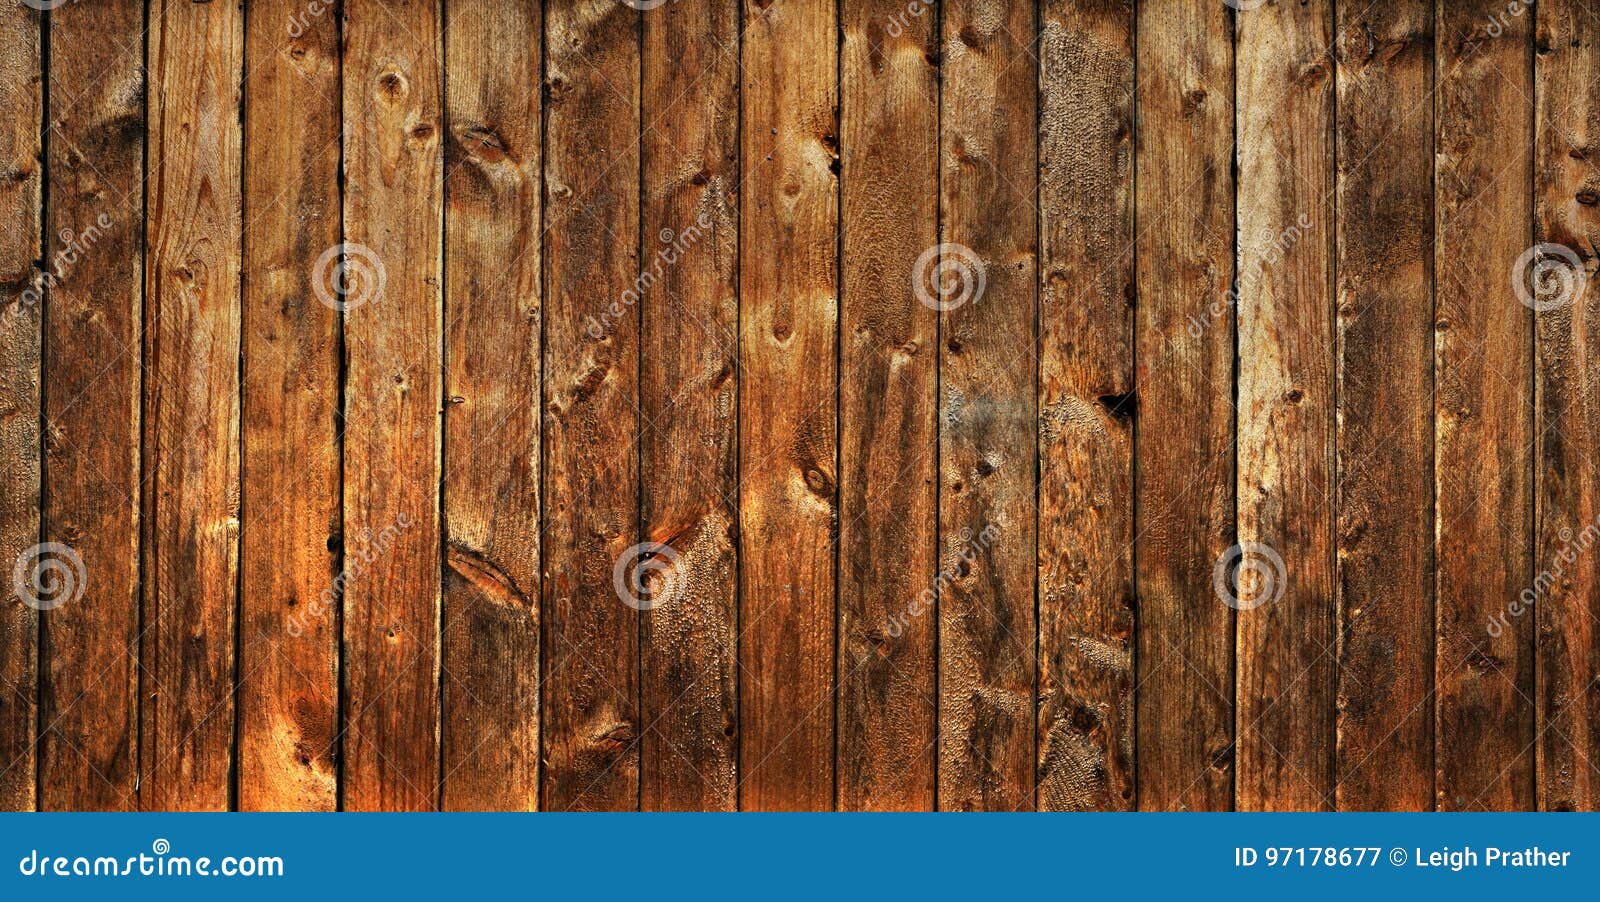 old worn out wooden planks background